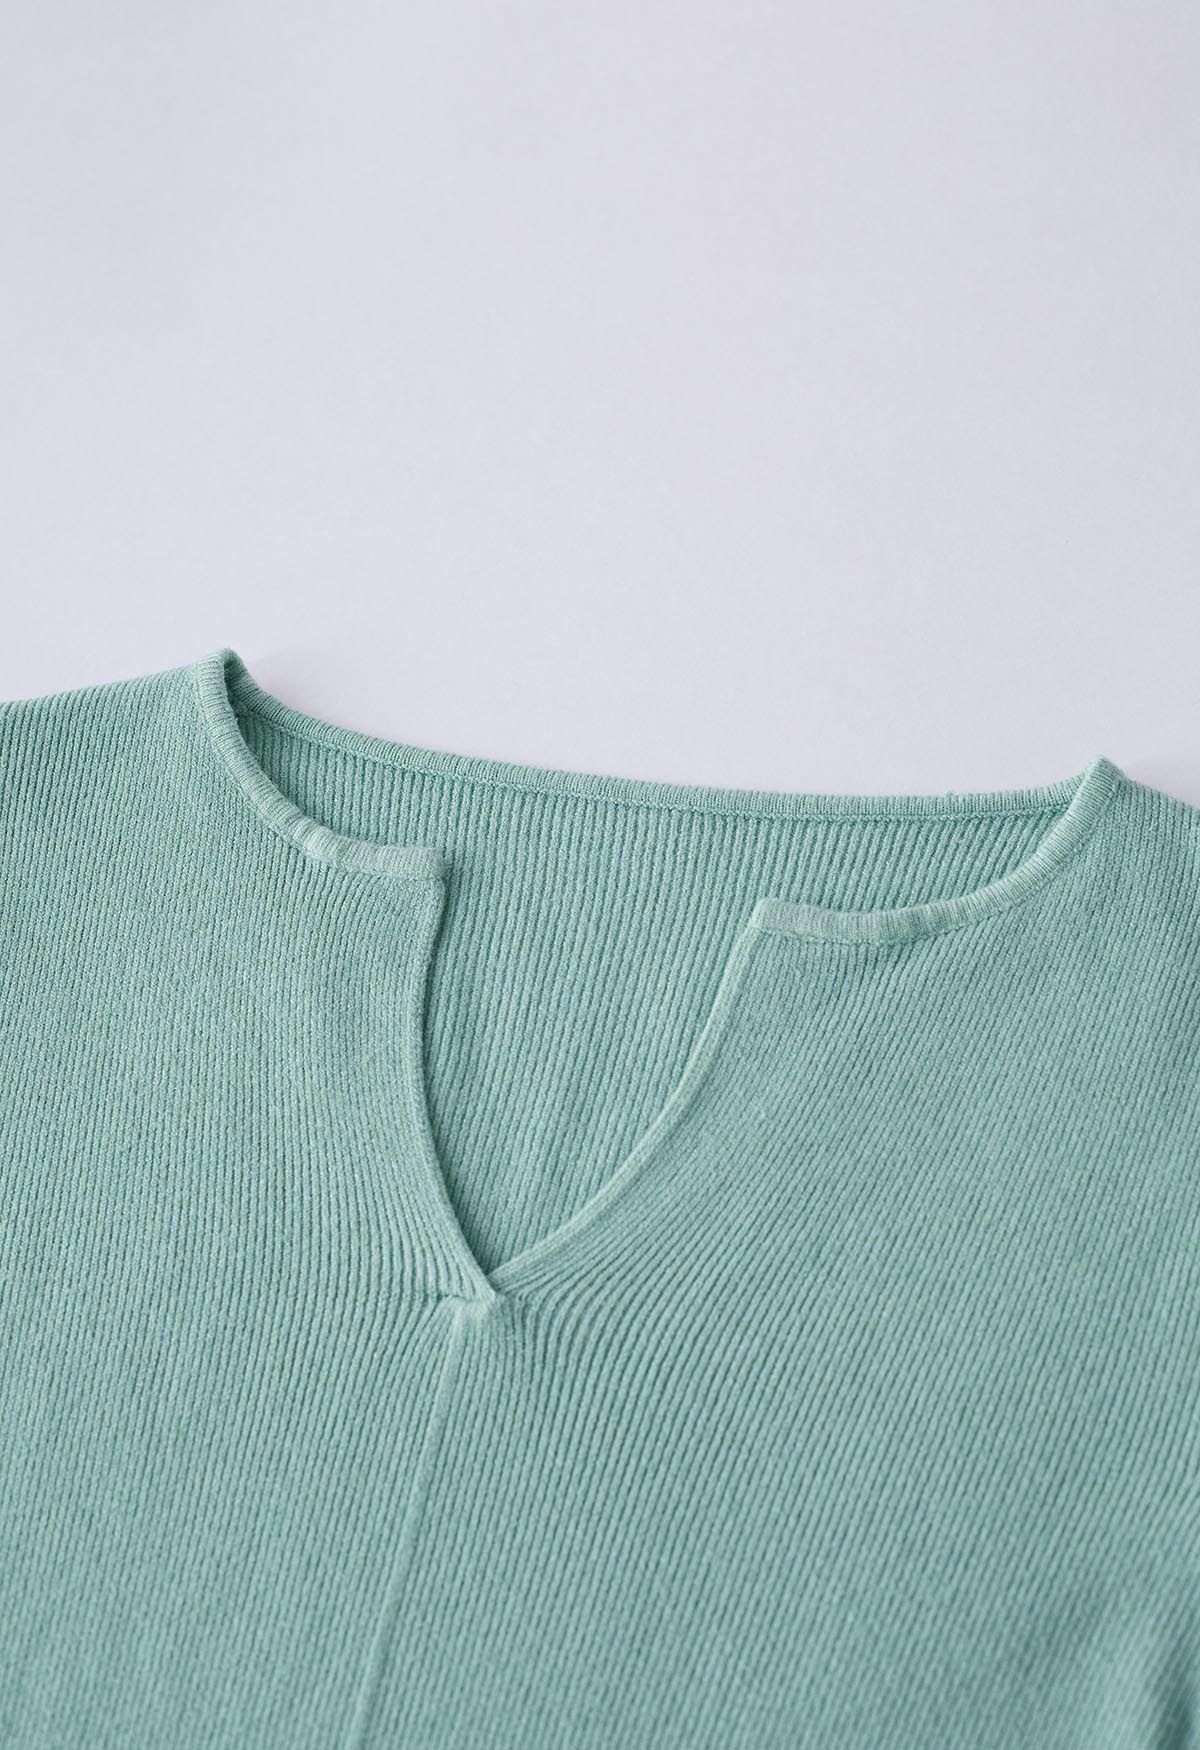 Notch Neckline Fitted Knit Top in Mint